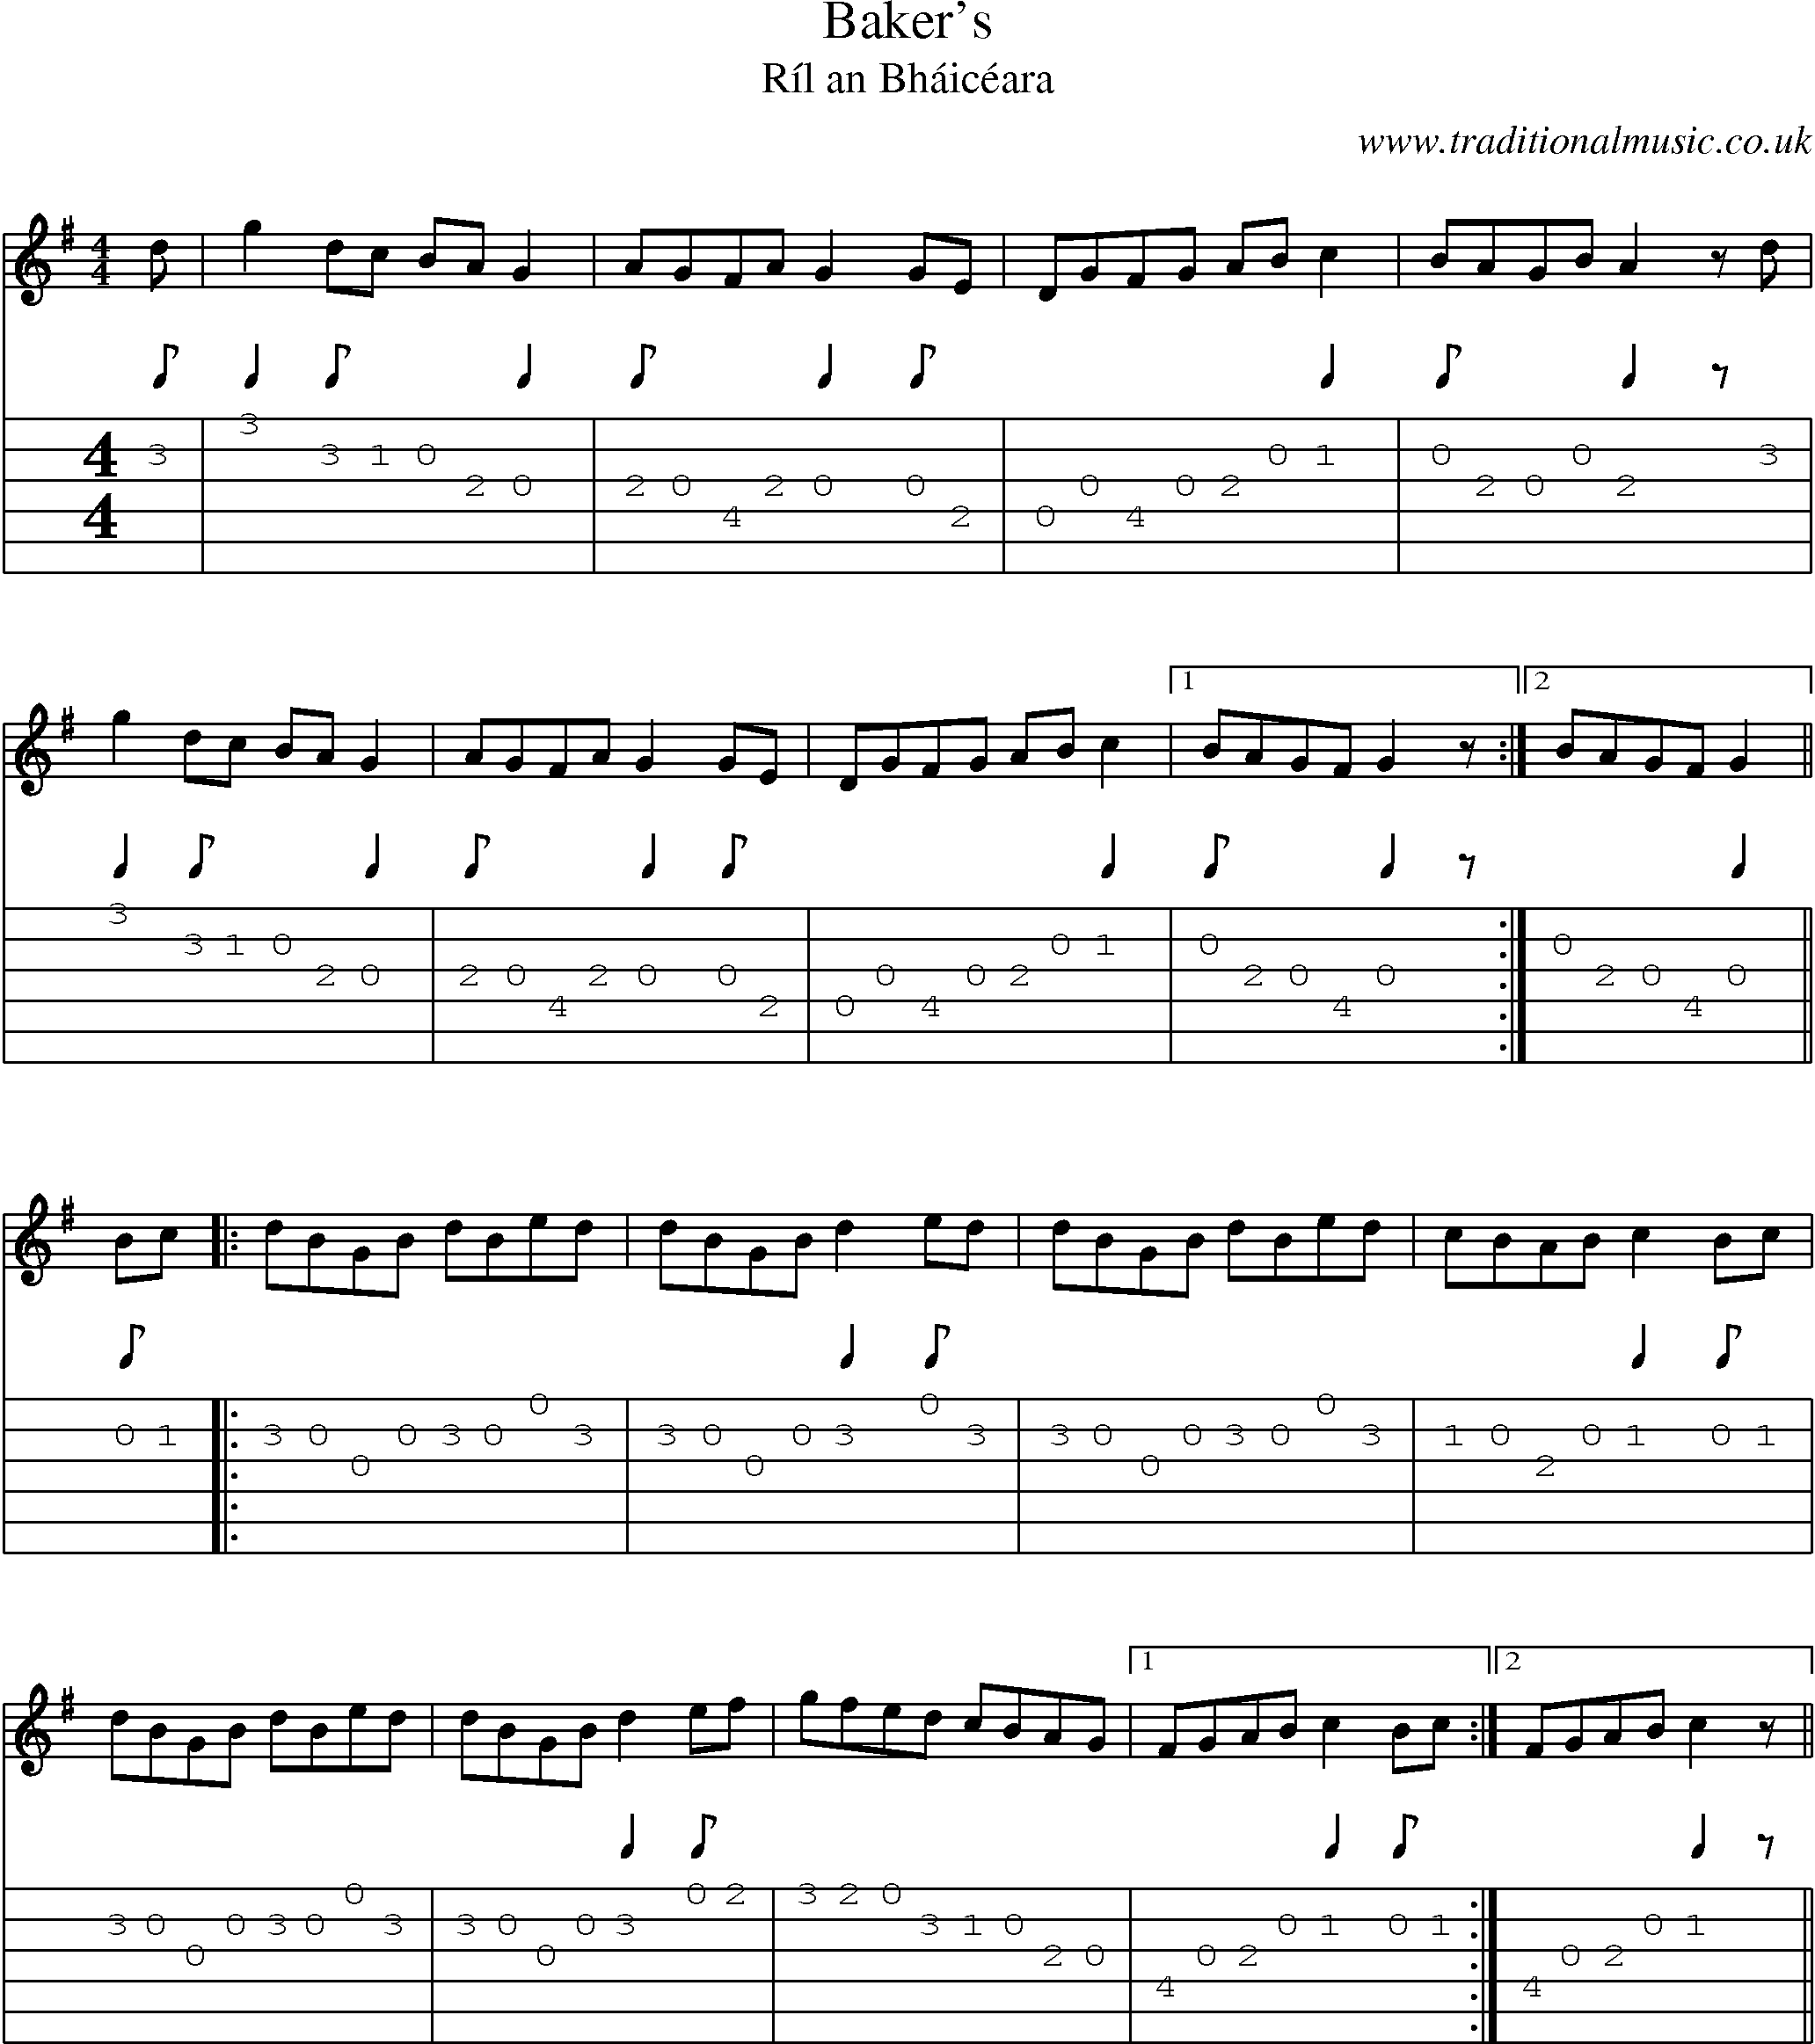 Music Score and Guitar Tabs for Bakers